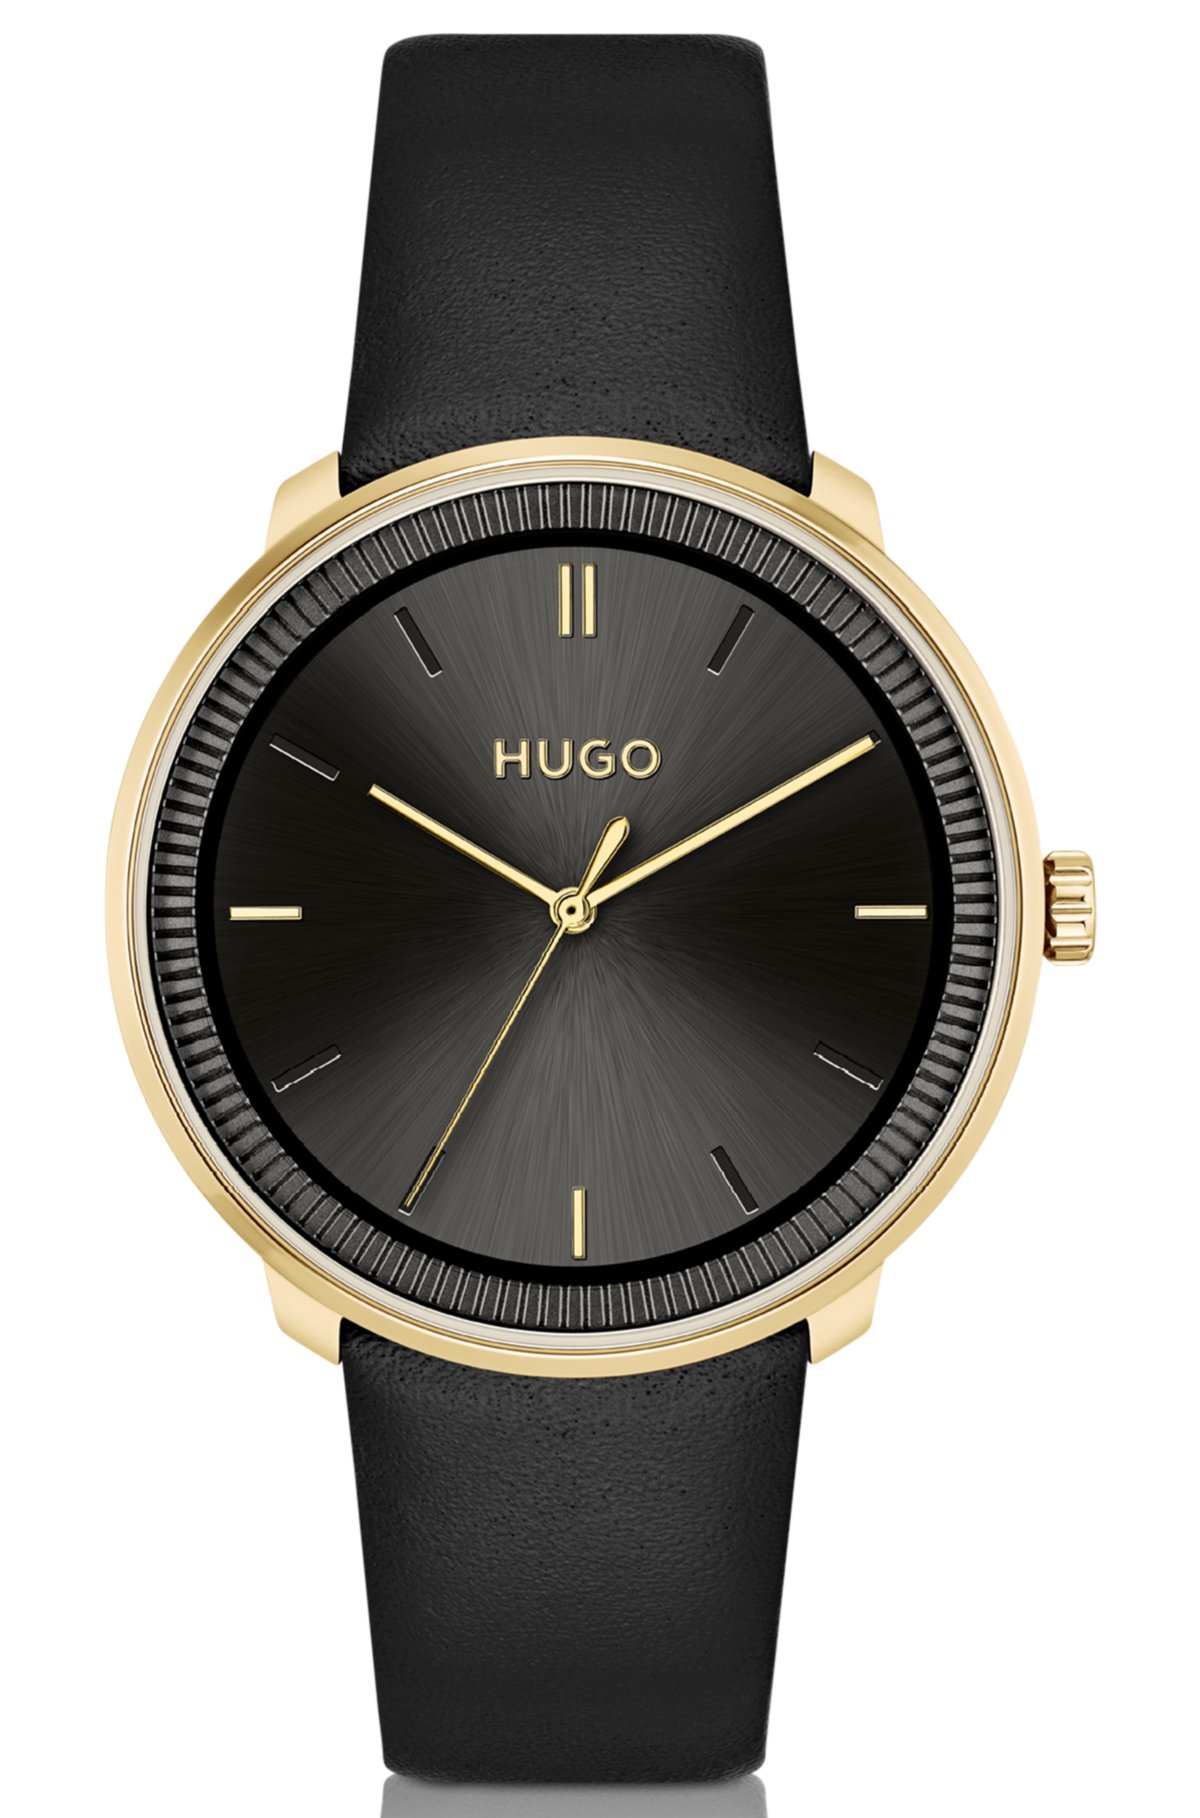 HUGO - Gold-effect watch with mesh bracelet and leather strap